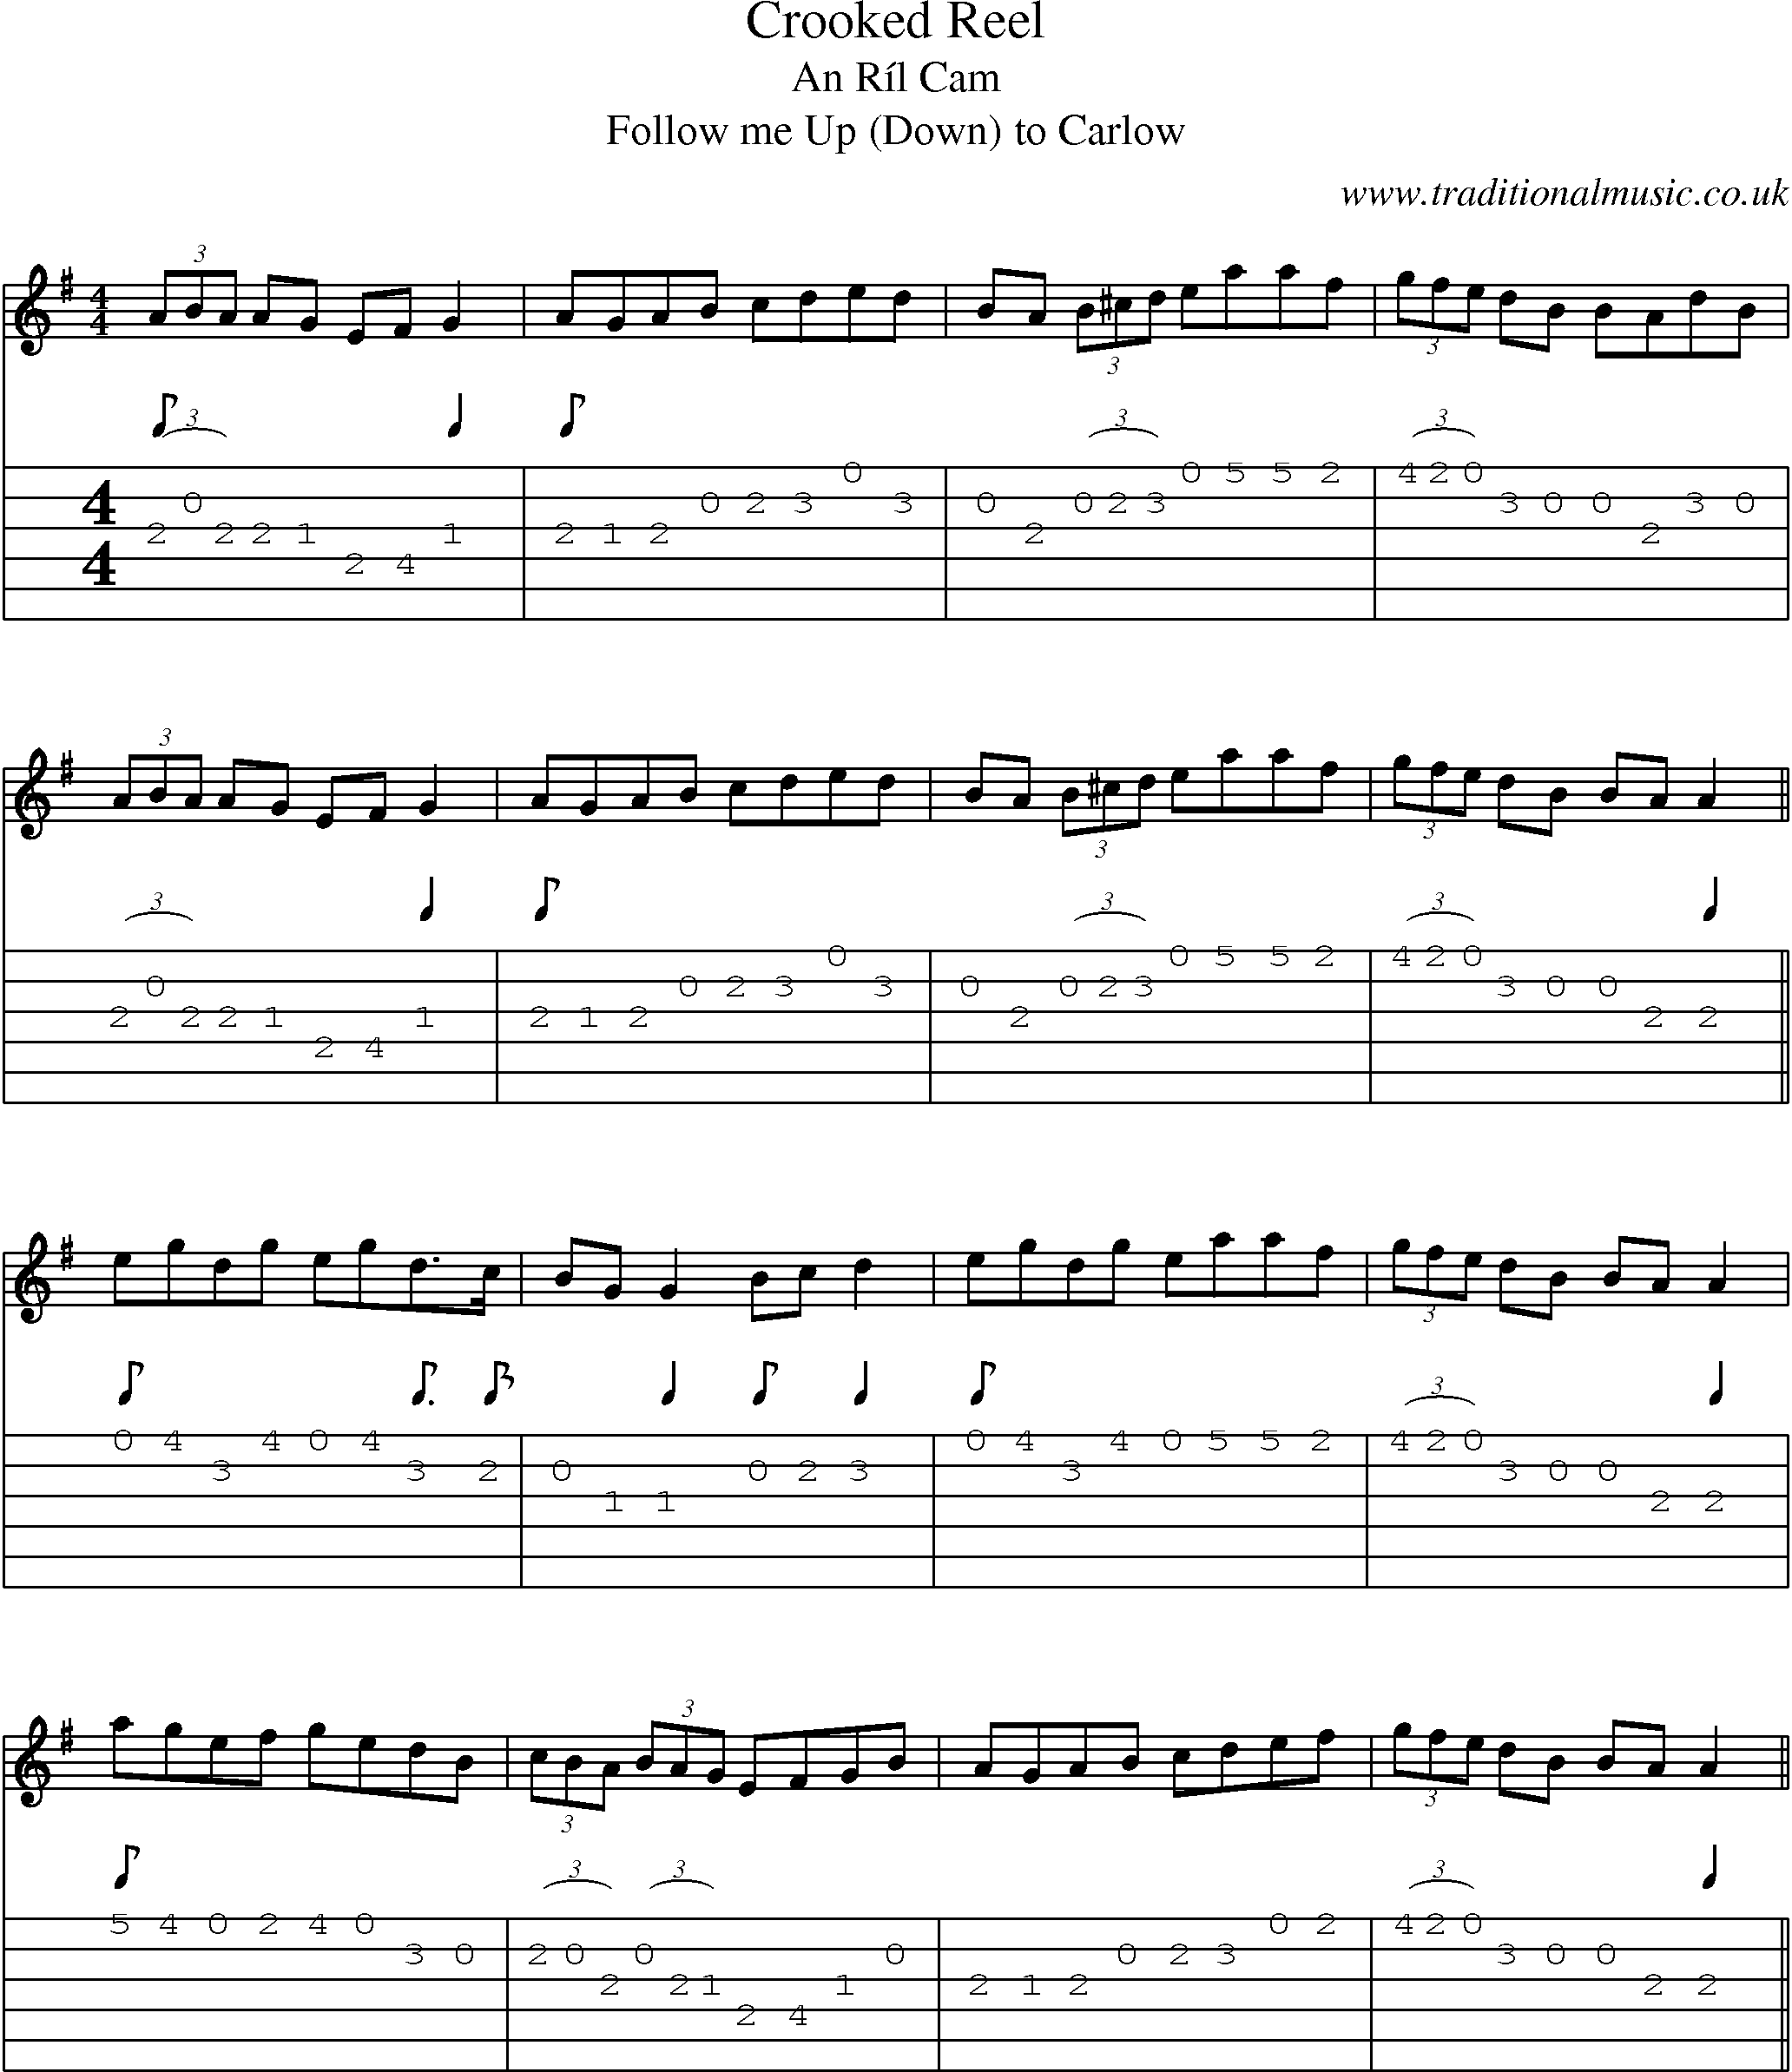 Music Score and Guitar Tabs for Crooked Reel